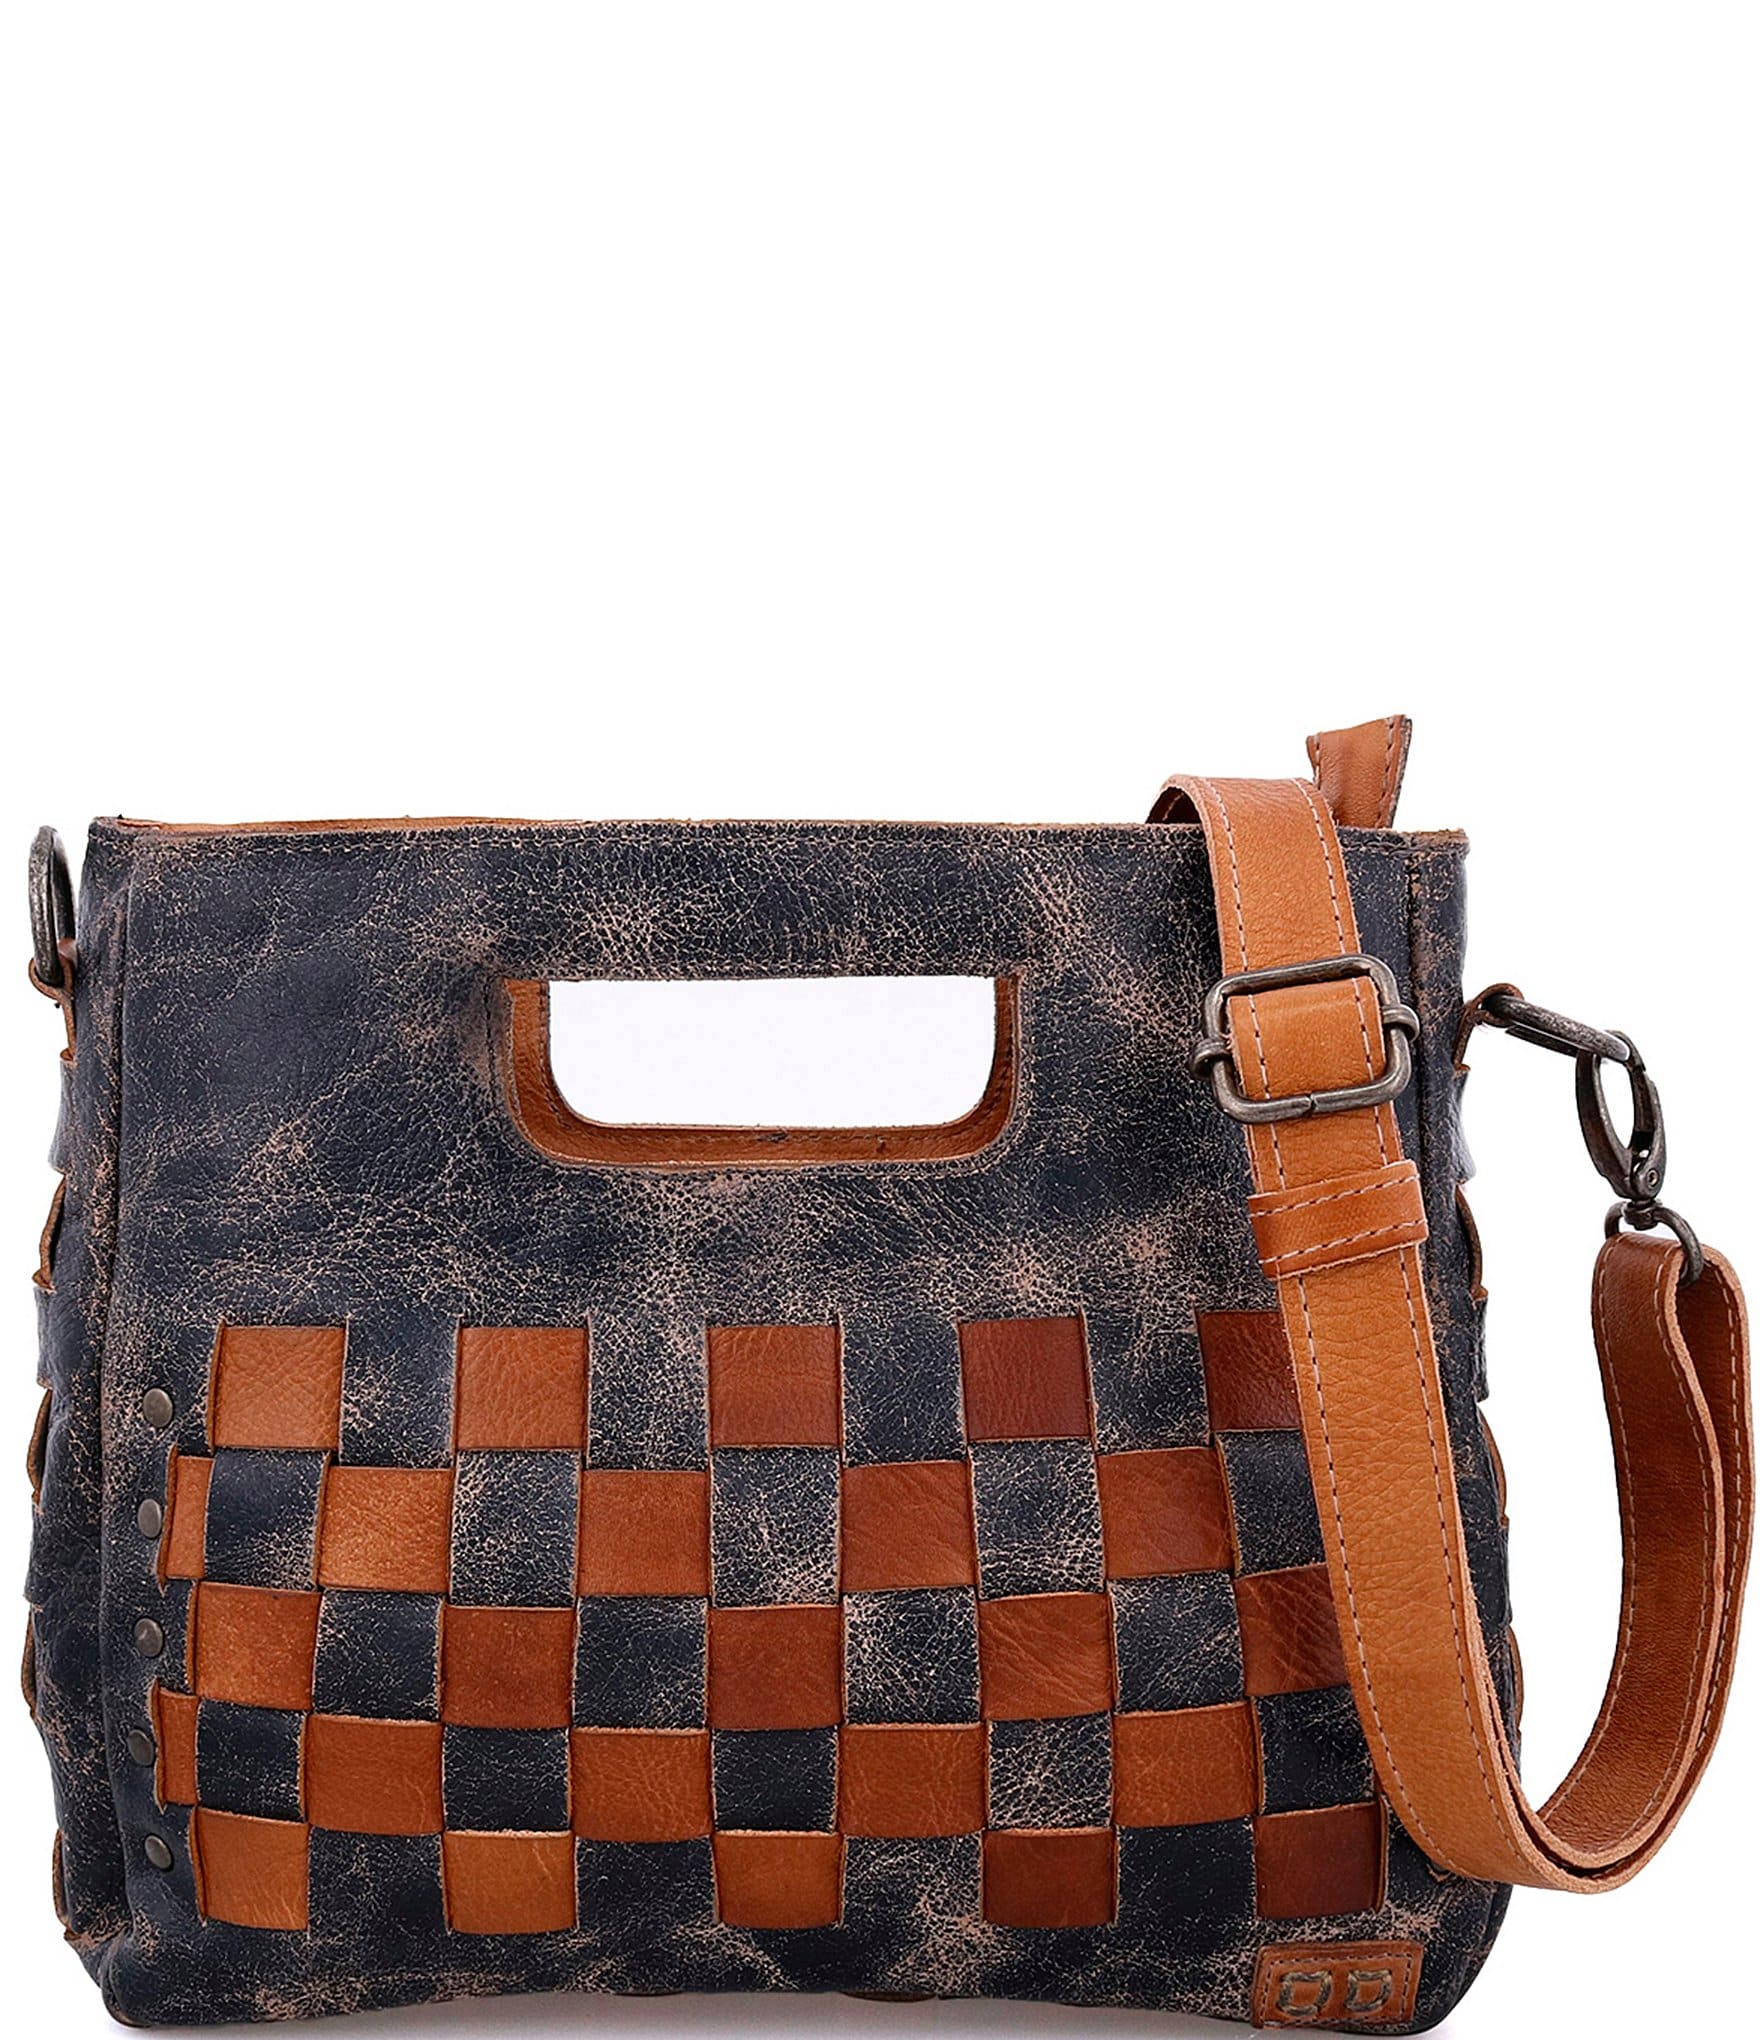 Bed Stu Orchid Woven Leather Purse - Women's Bags in Black Lux Tan